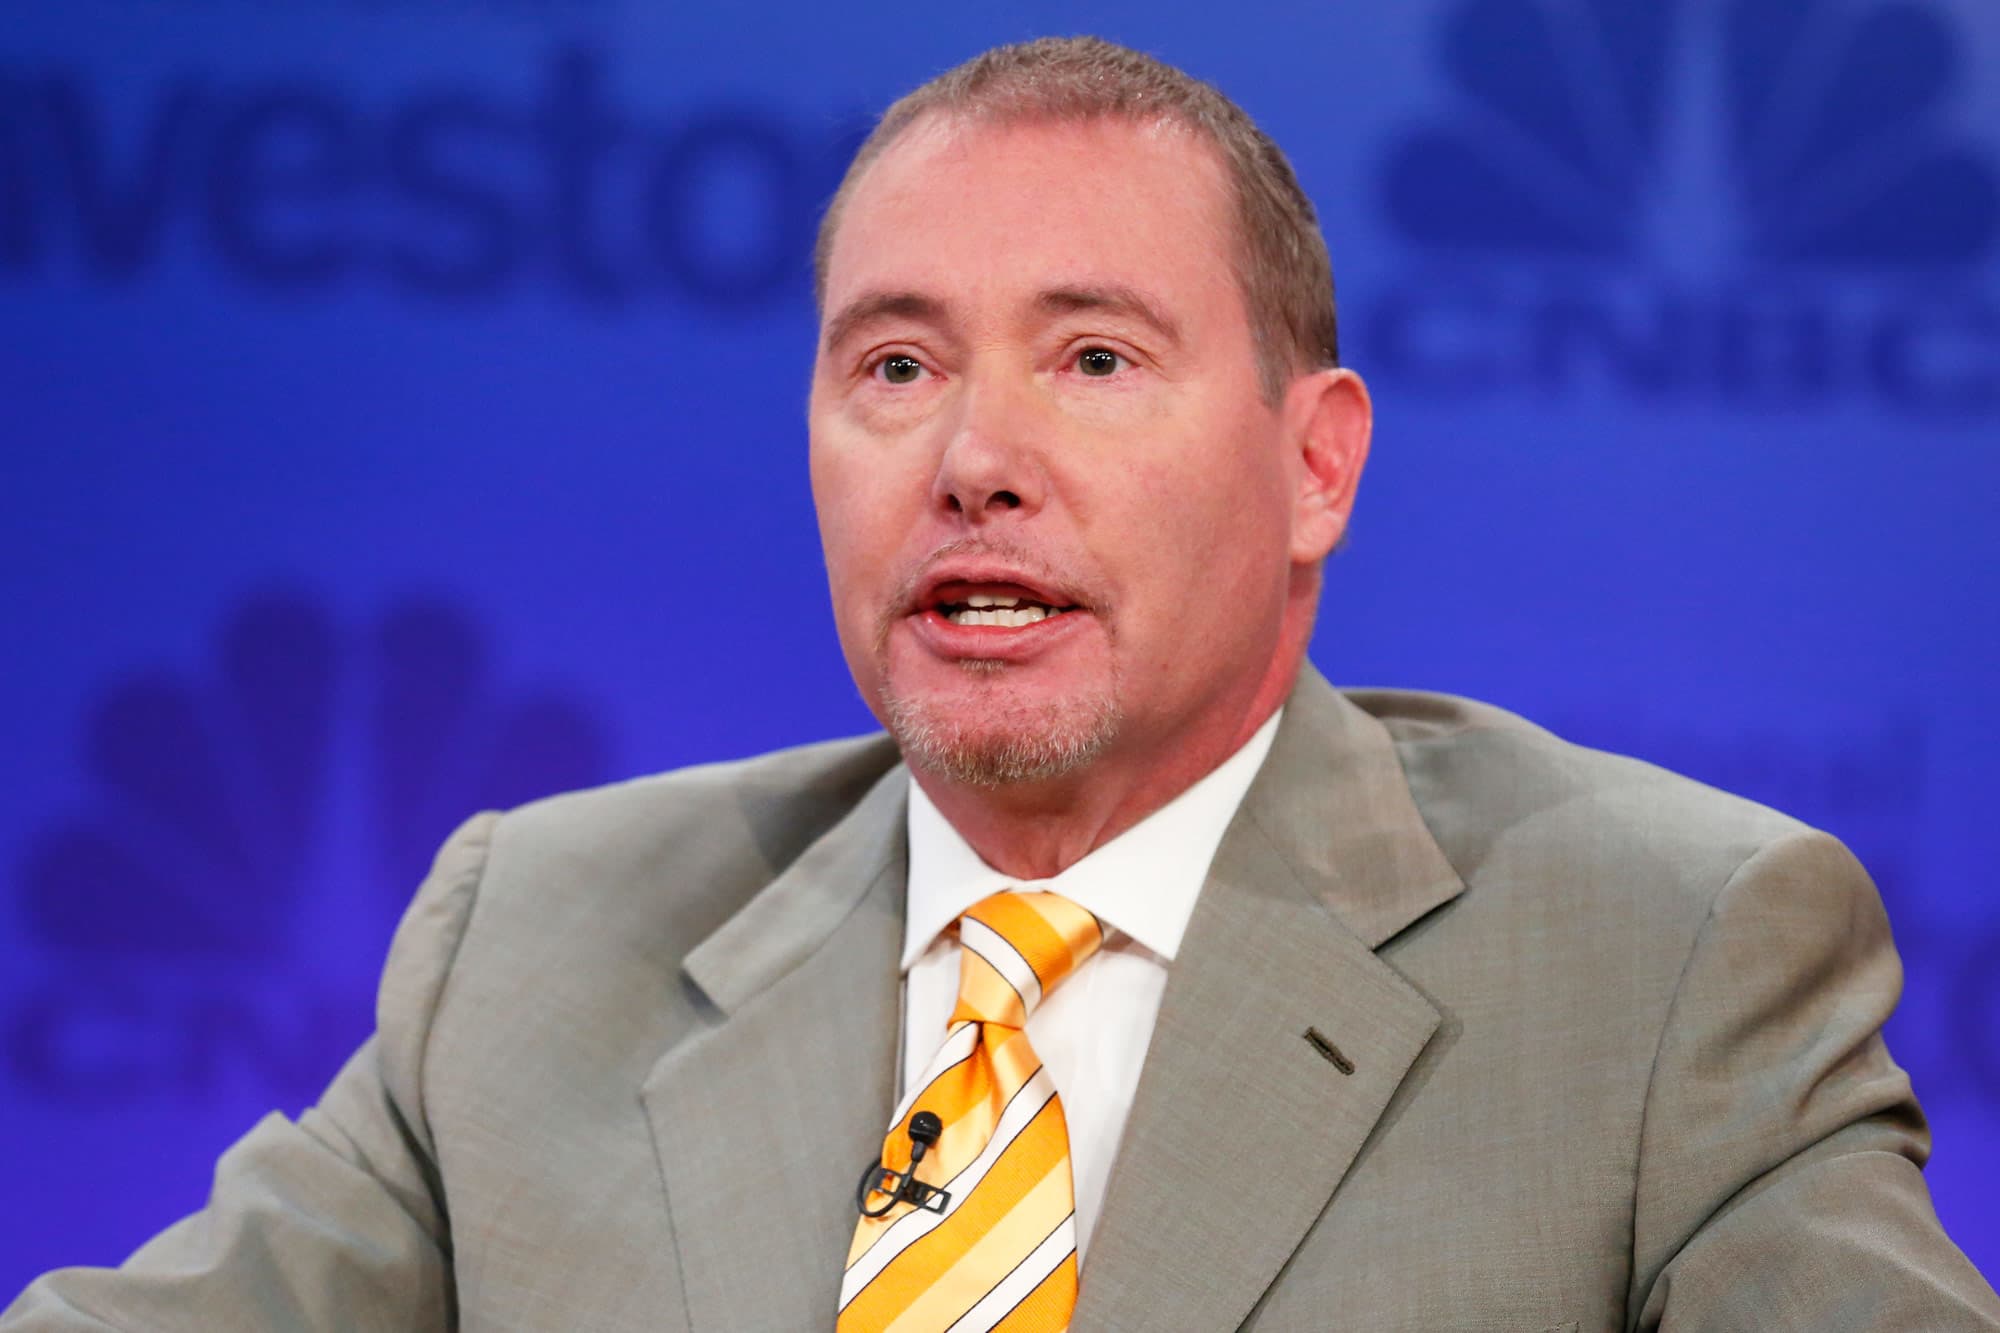 Jeffrey Gundlach is buying Treasurys after calling bond market most attractive in years